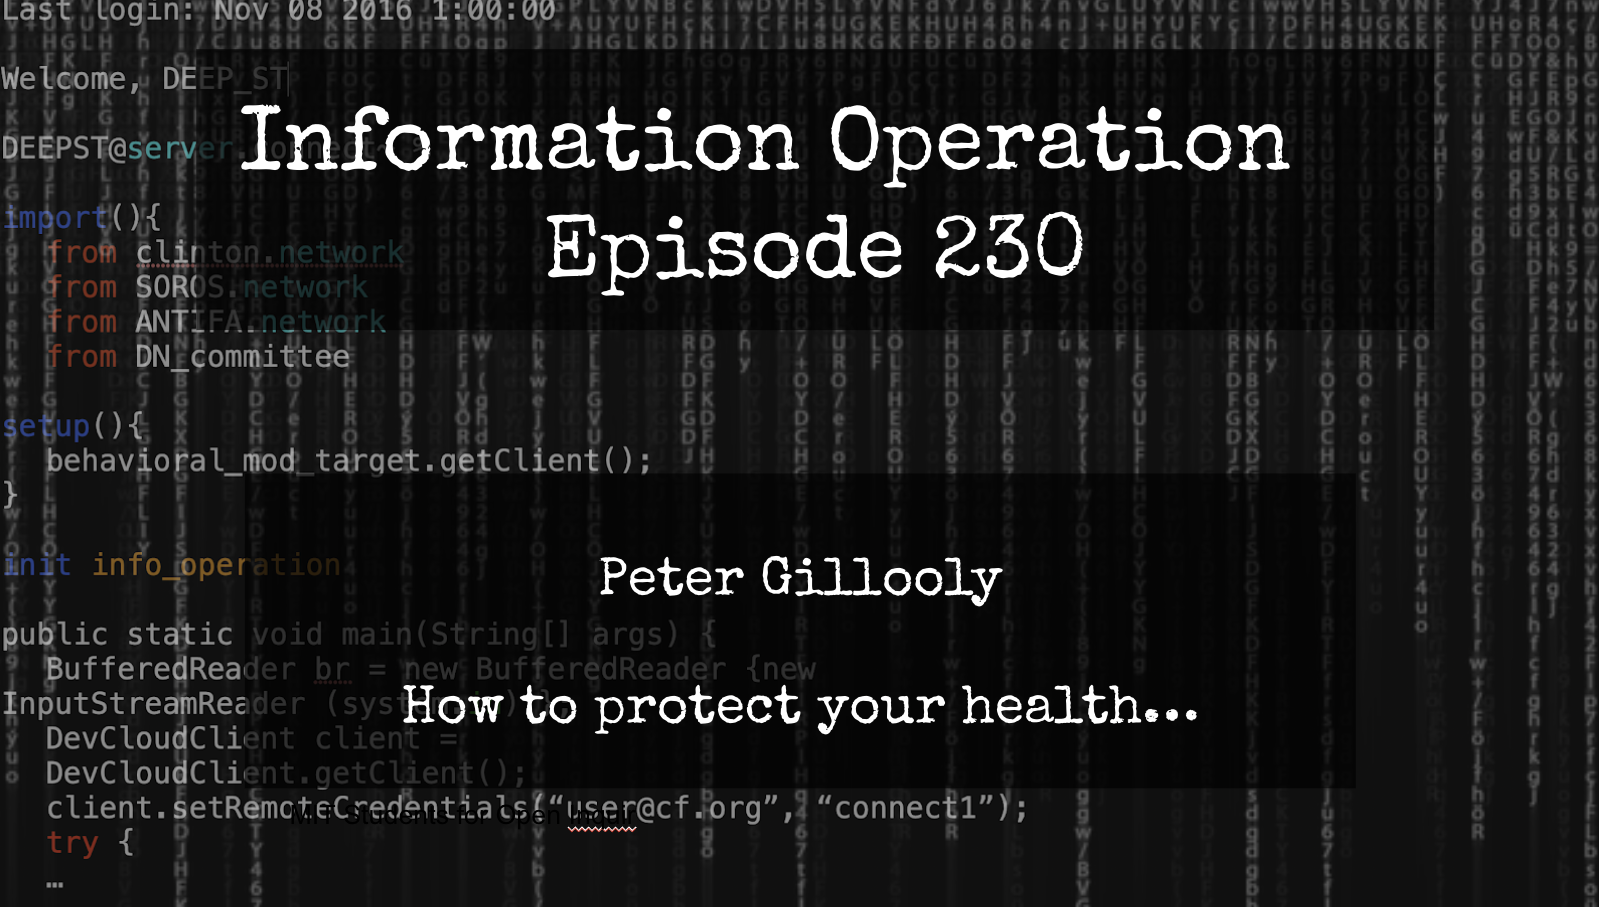 IO Episode 230 - Peter Gillooly - How To Protect Your Healthcare 4/2/24